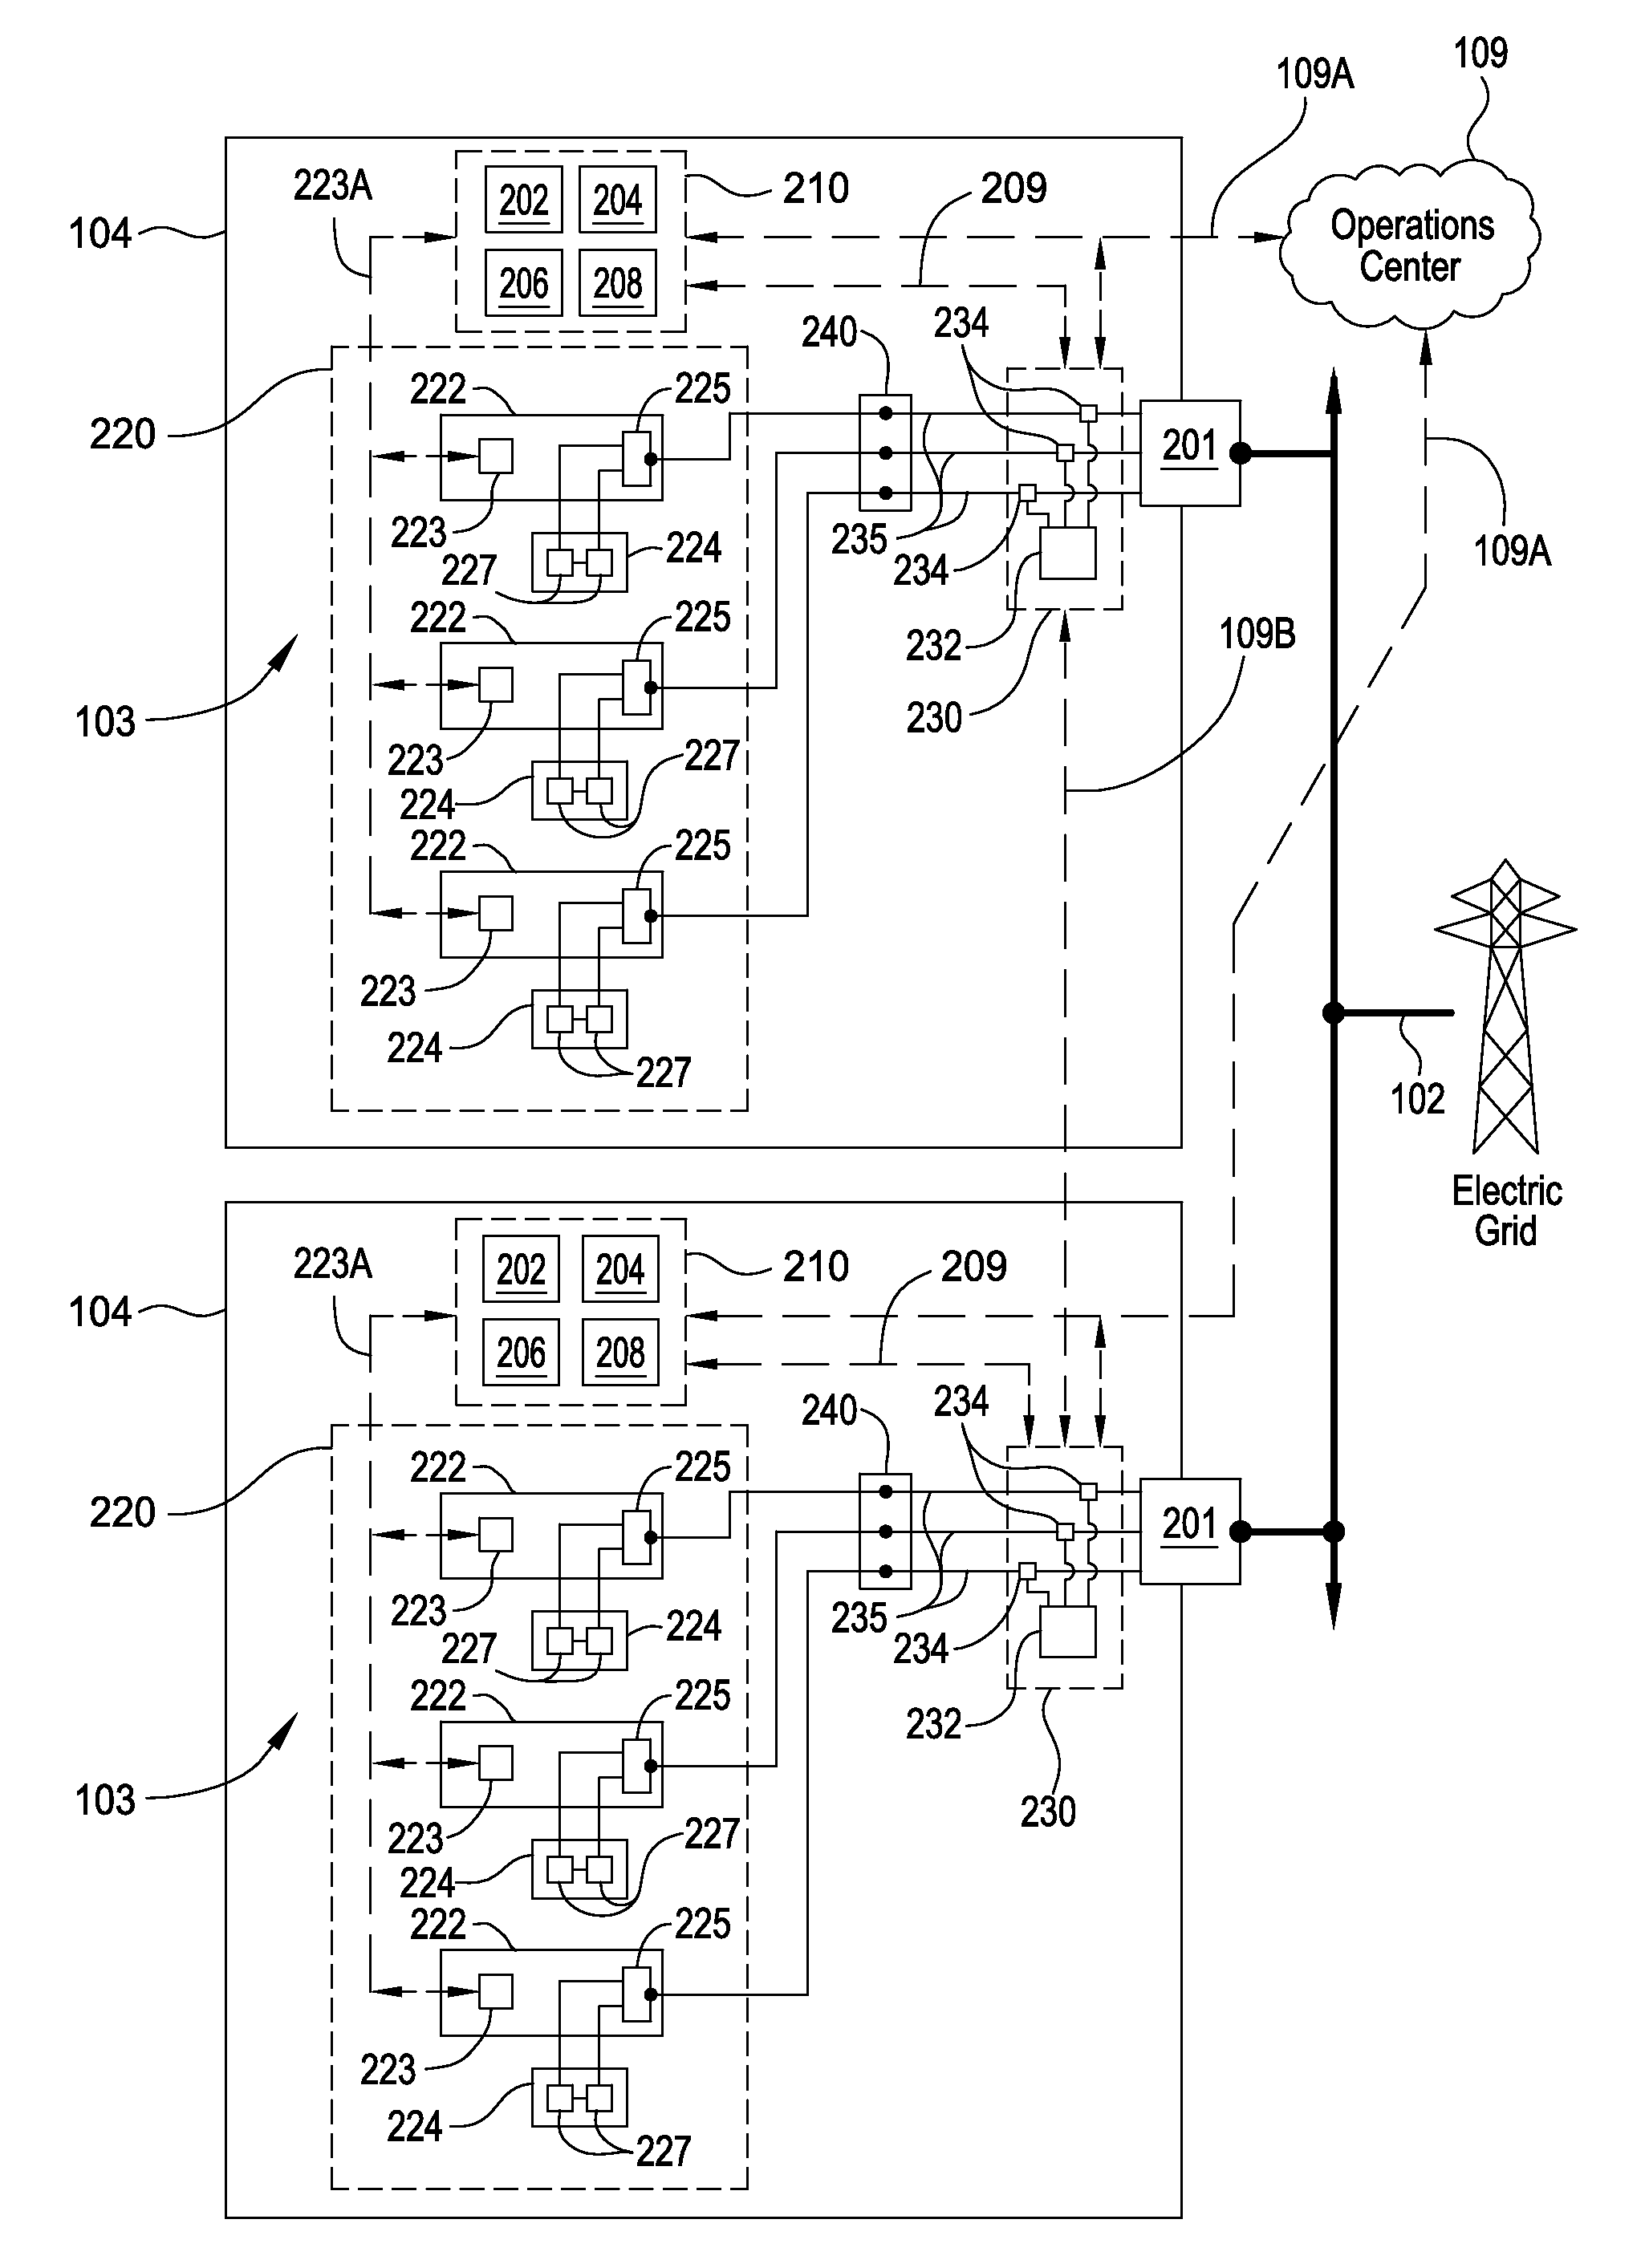 Method for balancing frequency instability on an electric grid using networked distributed energy storage systems